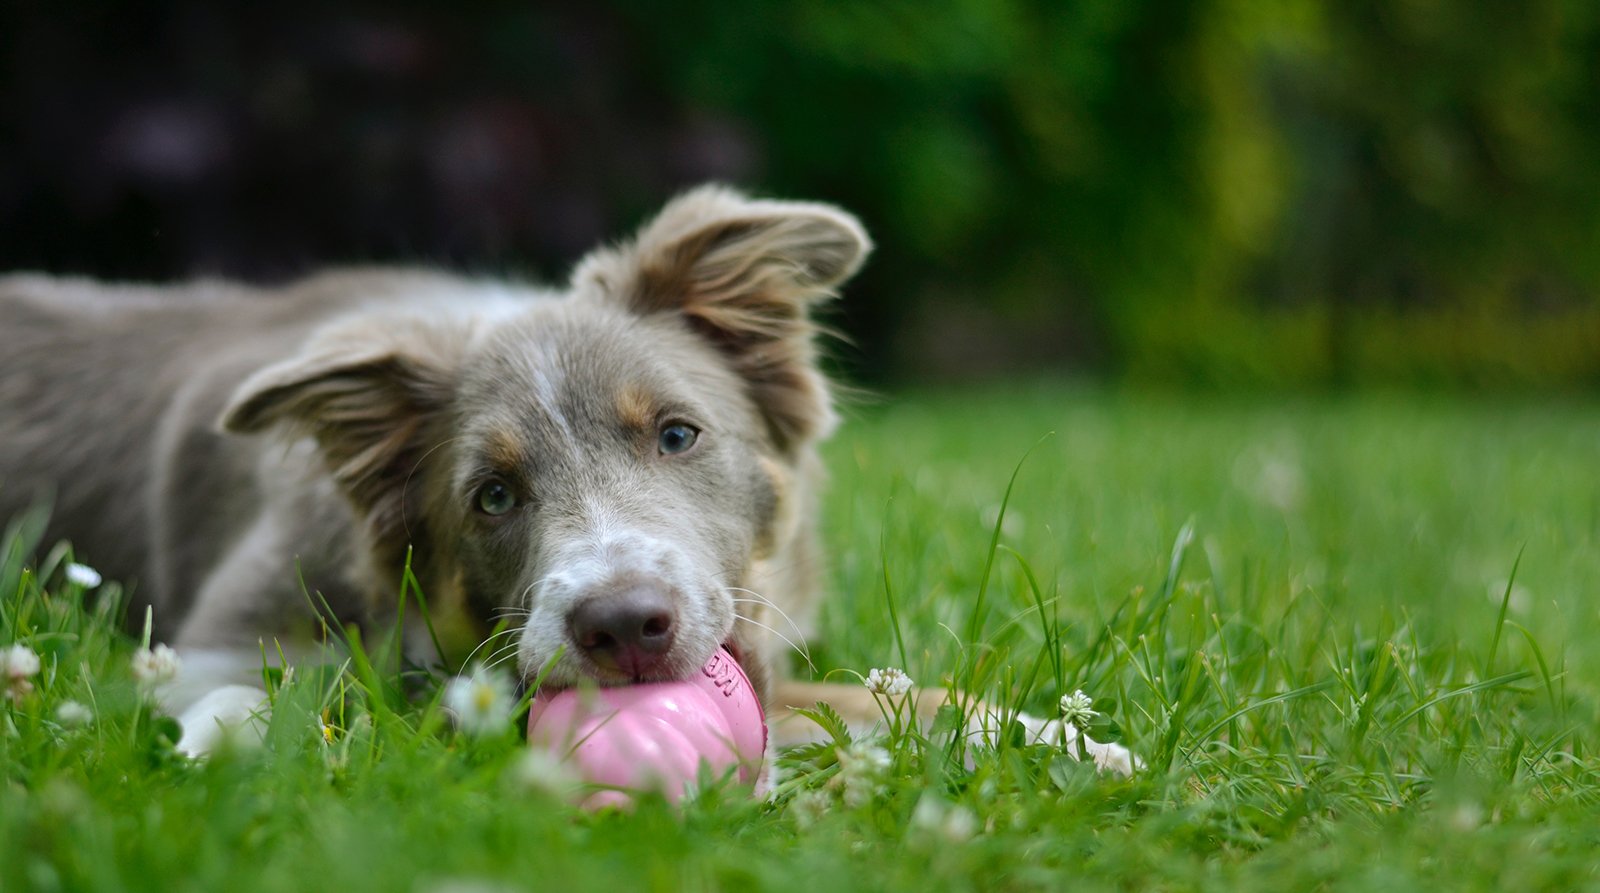 Canine Enrichment 101: Helping Your Dog Live His Best Life!